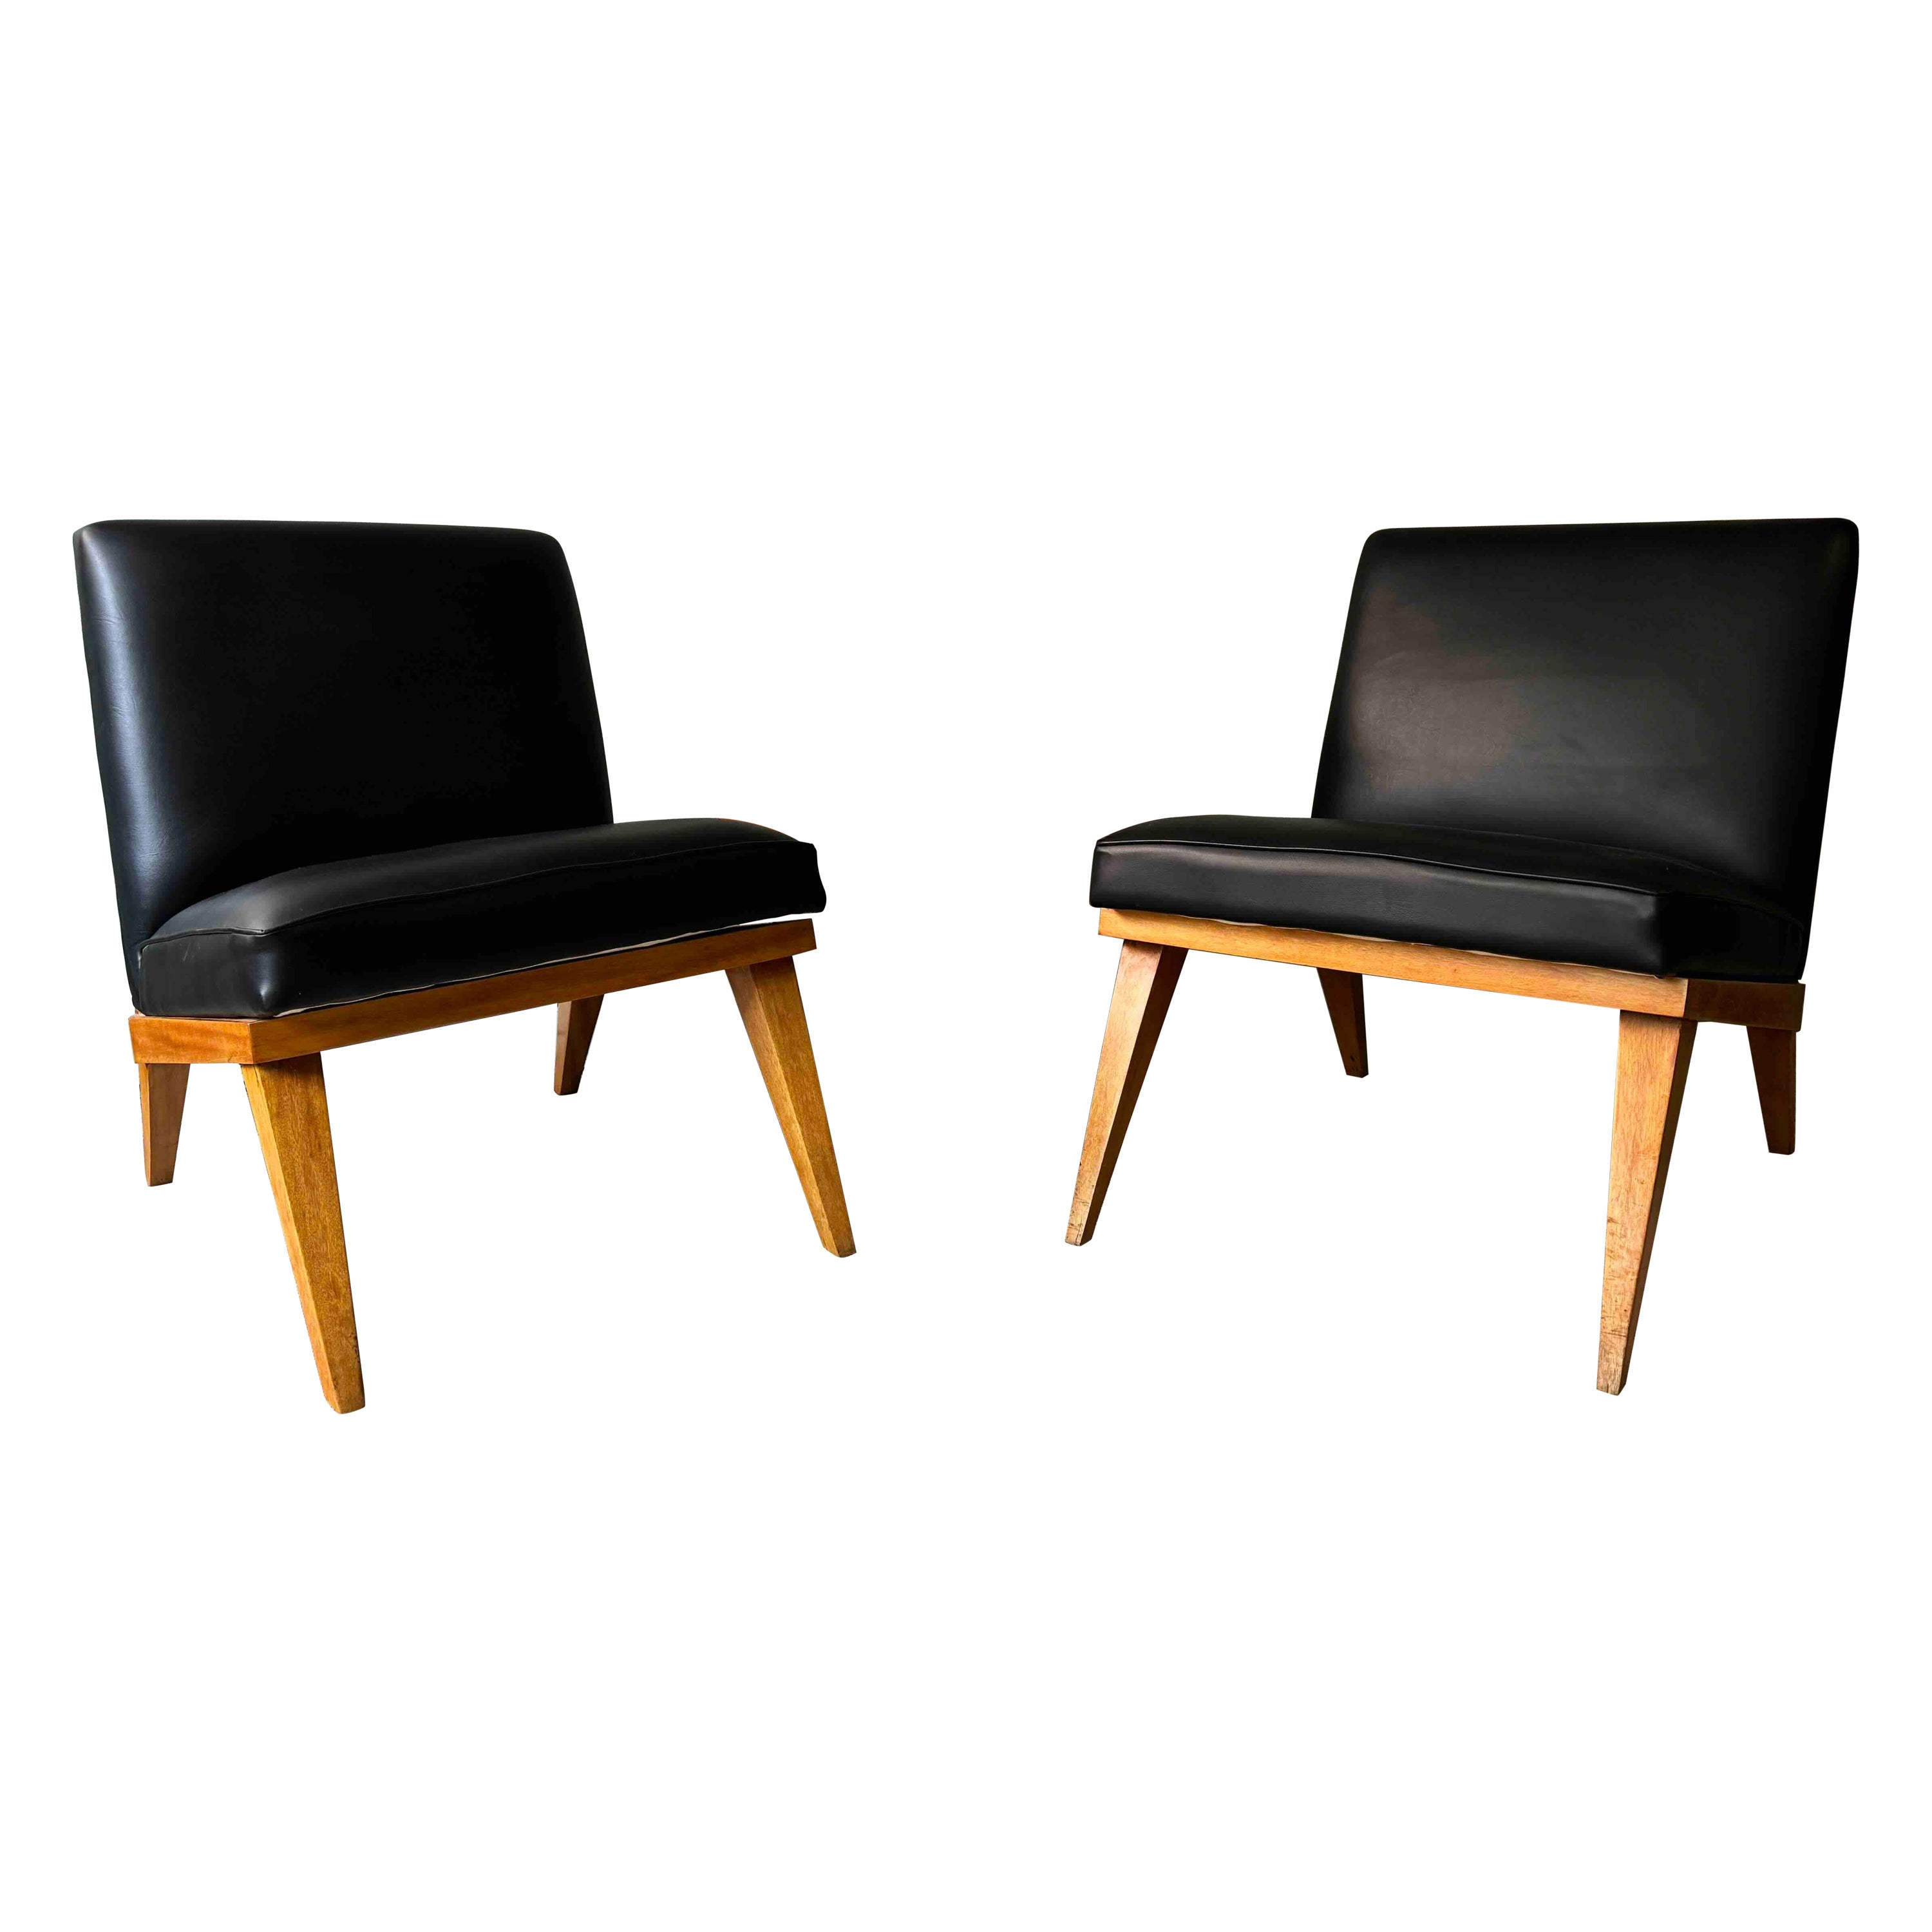 Pair of Low Chair in the style of Jens Risom Slipper Chair. 1950's